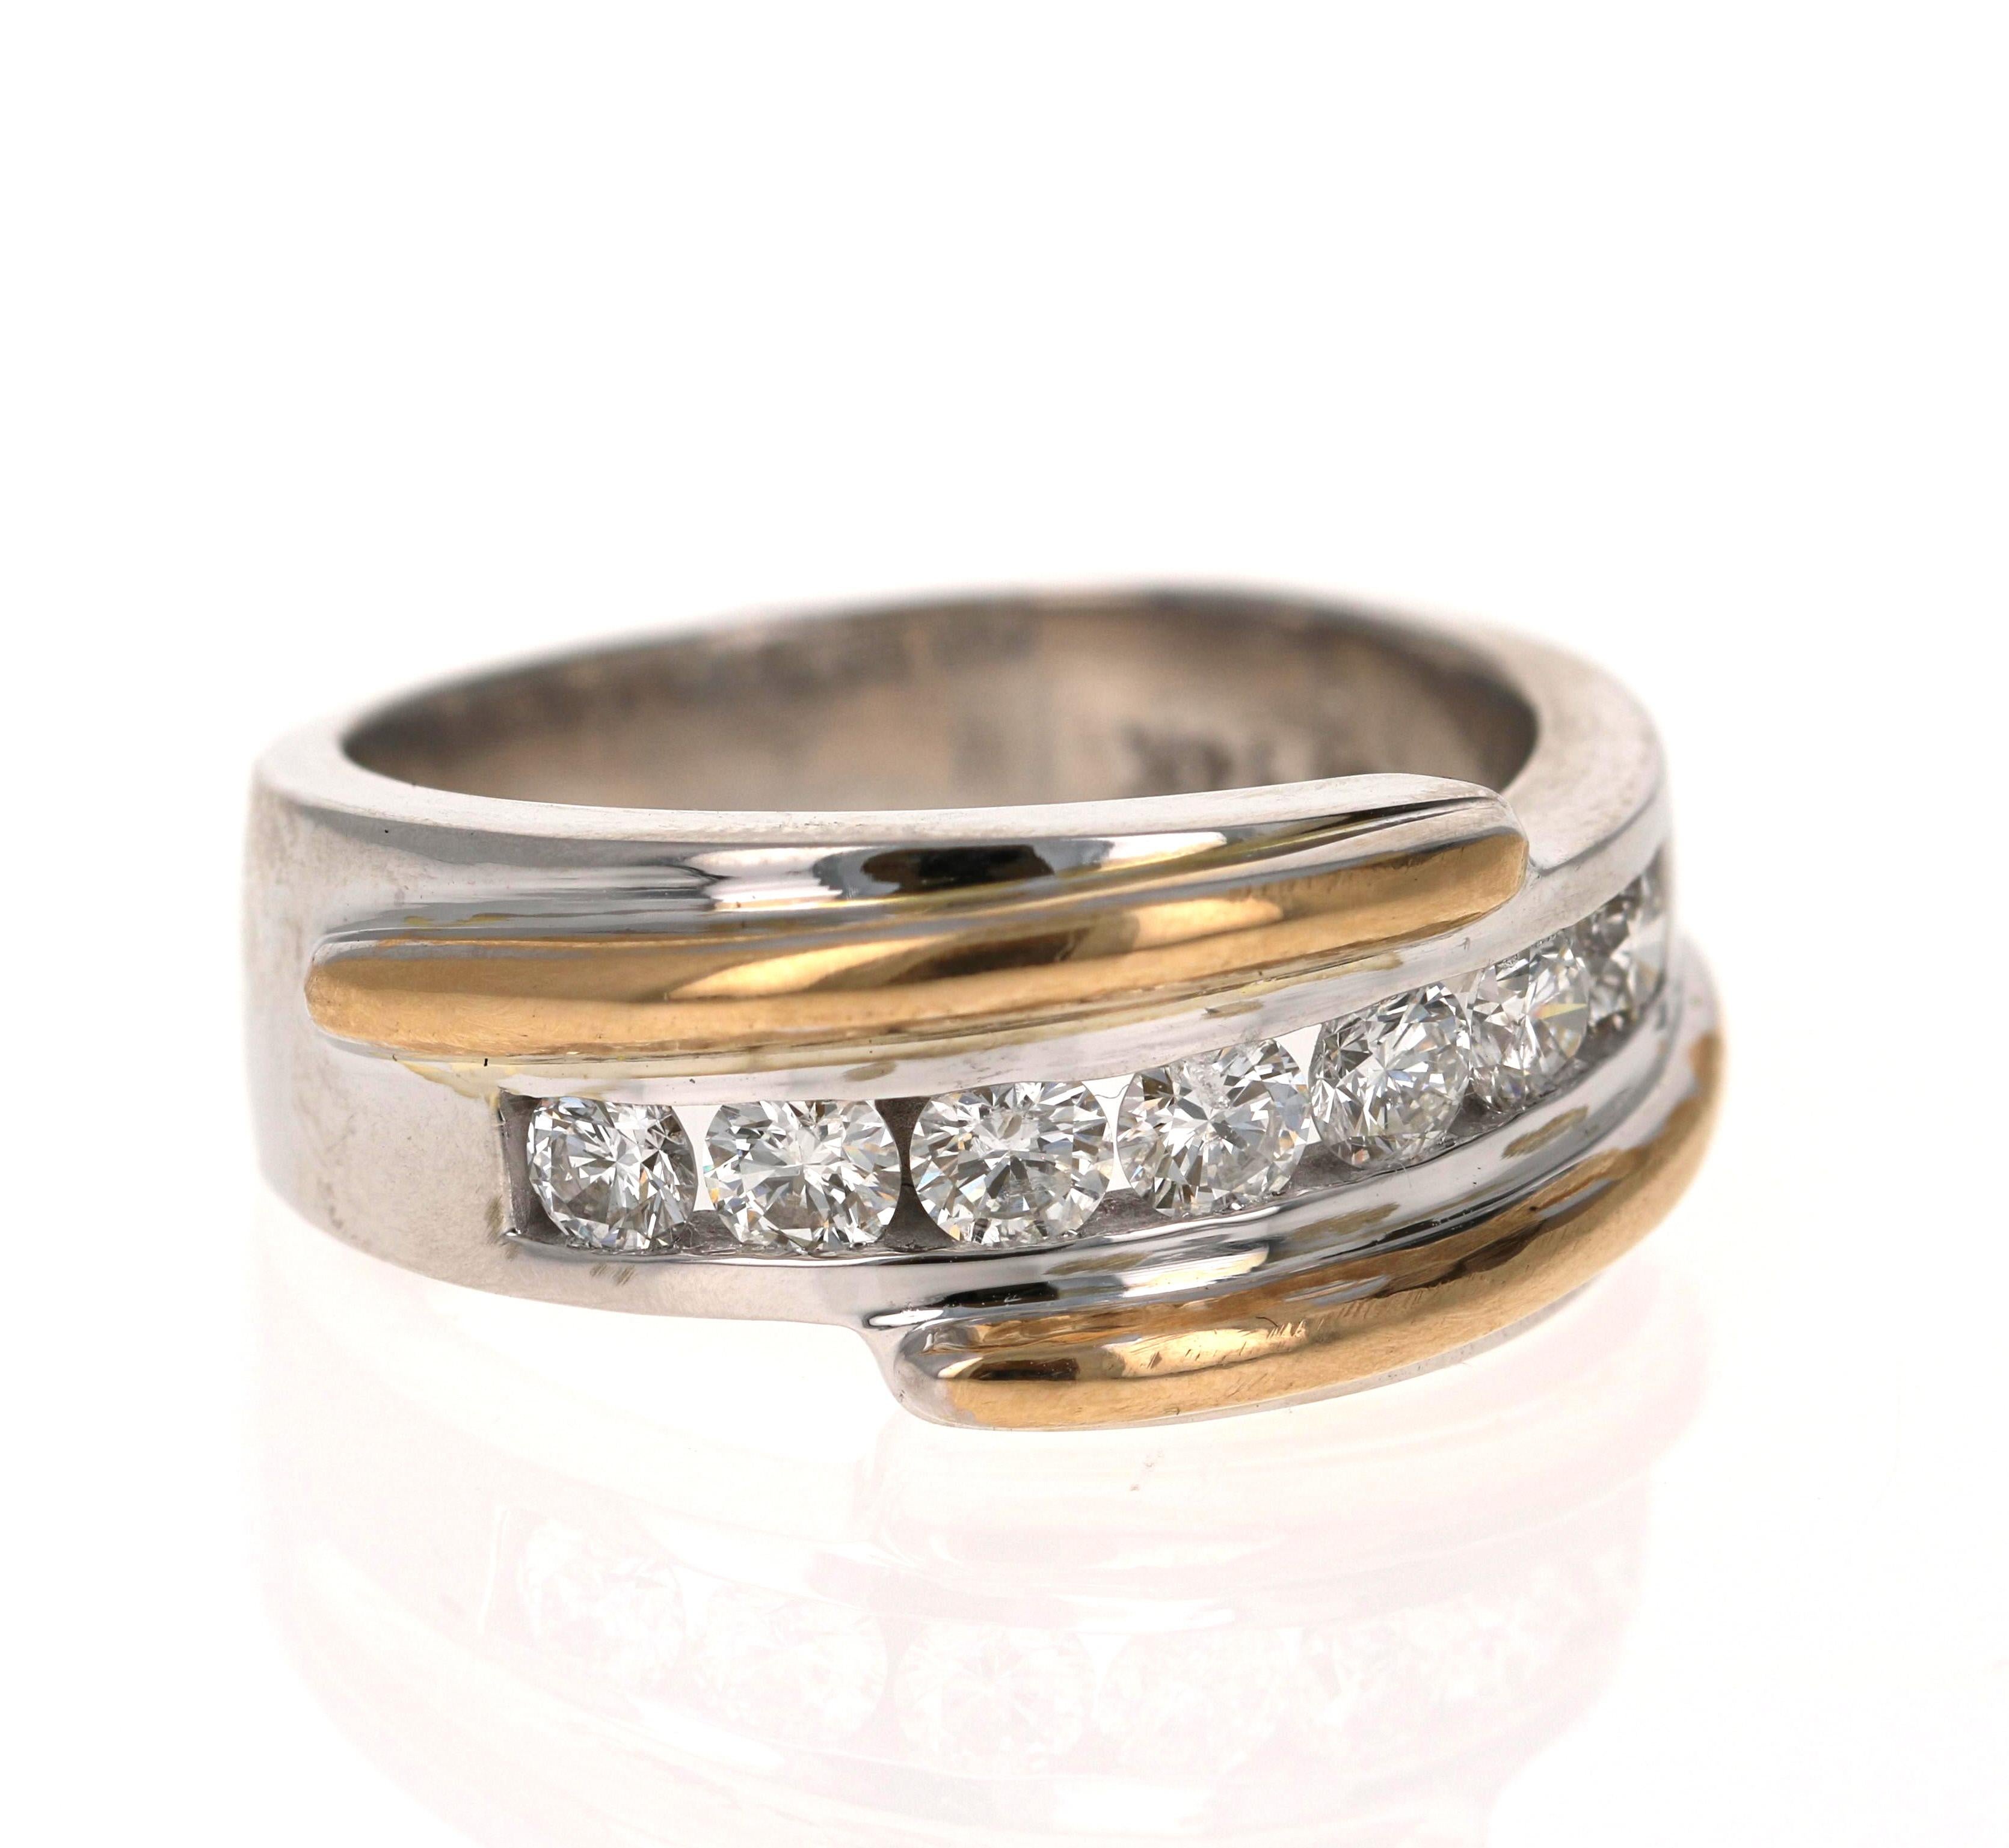 We have a Men's Collection of Fine Jewelry!  Beautiful, Bold, Masculine and Simple Men's Wedding Rings/Bands. 

This Men's Band has 7 Round Cut Diamonds that weigh 1.00 Carats.  The Clarity and Color of the Diamonds is SI-F.

It is crafted in 14